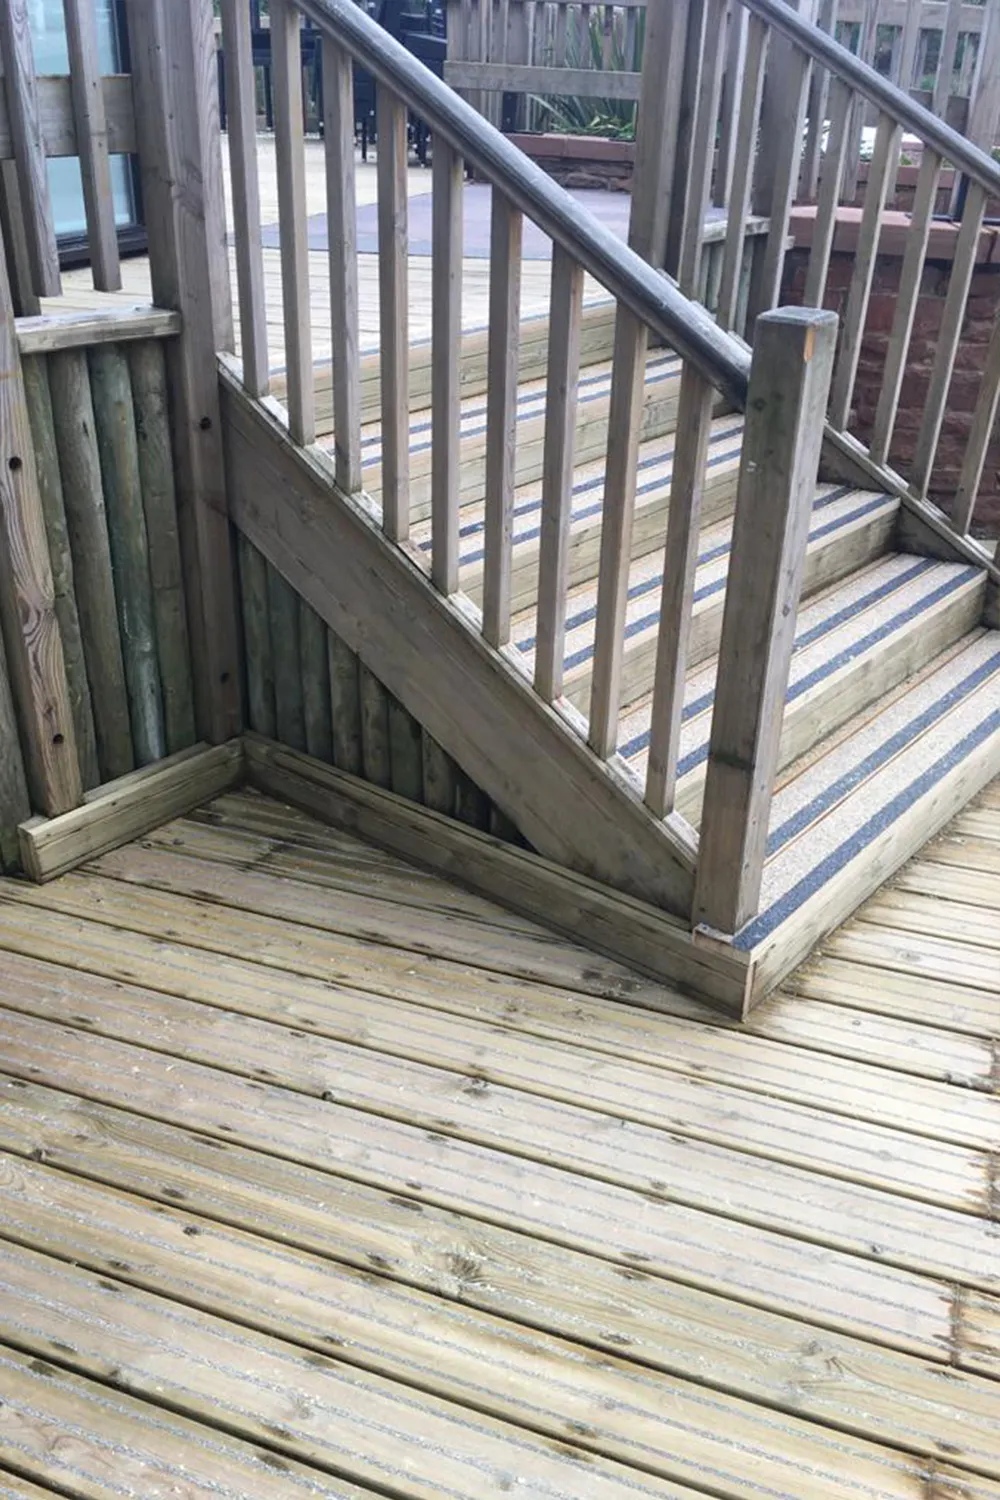 Non-slip decking steps at Center Parcs Whinfell Forest